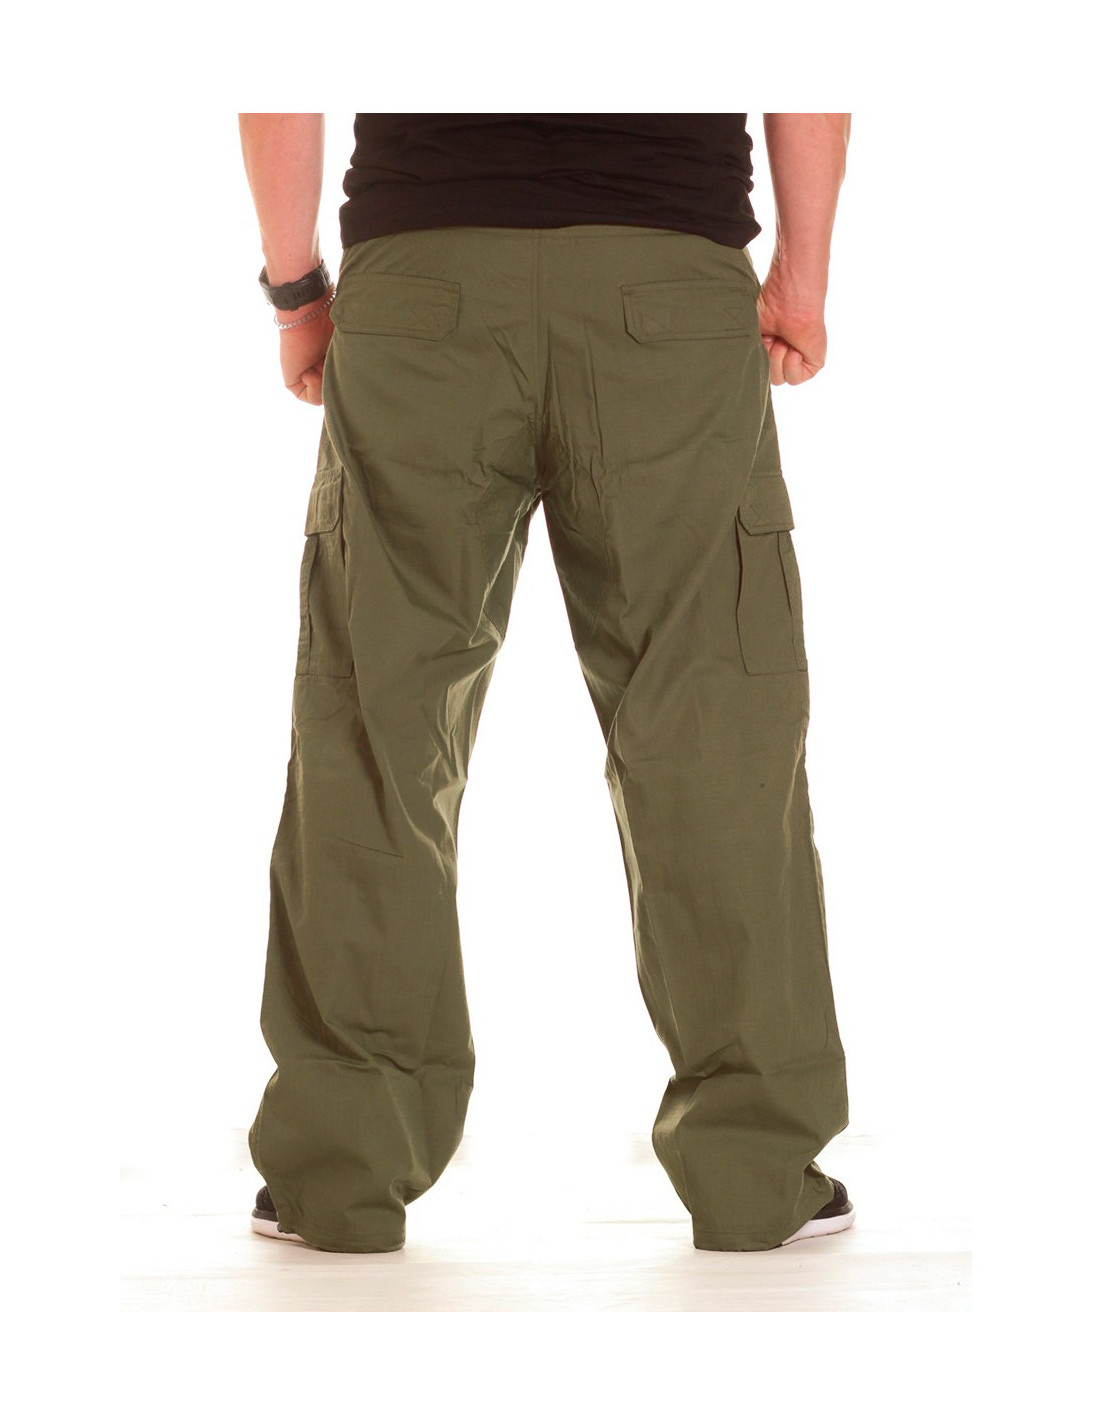 BSAT Cargo Army Green Olive Baggy fit